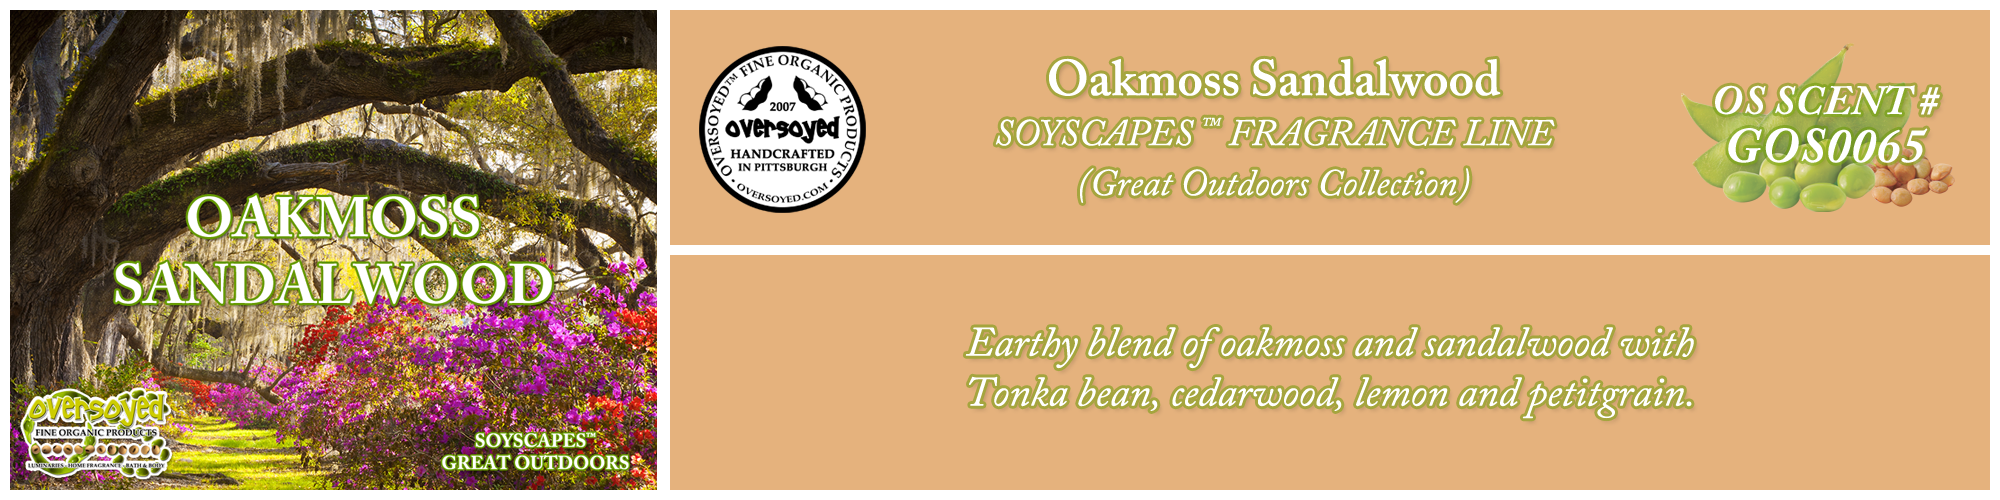 Oakmoss Sandalwood Handcrafted Products Collection